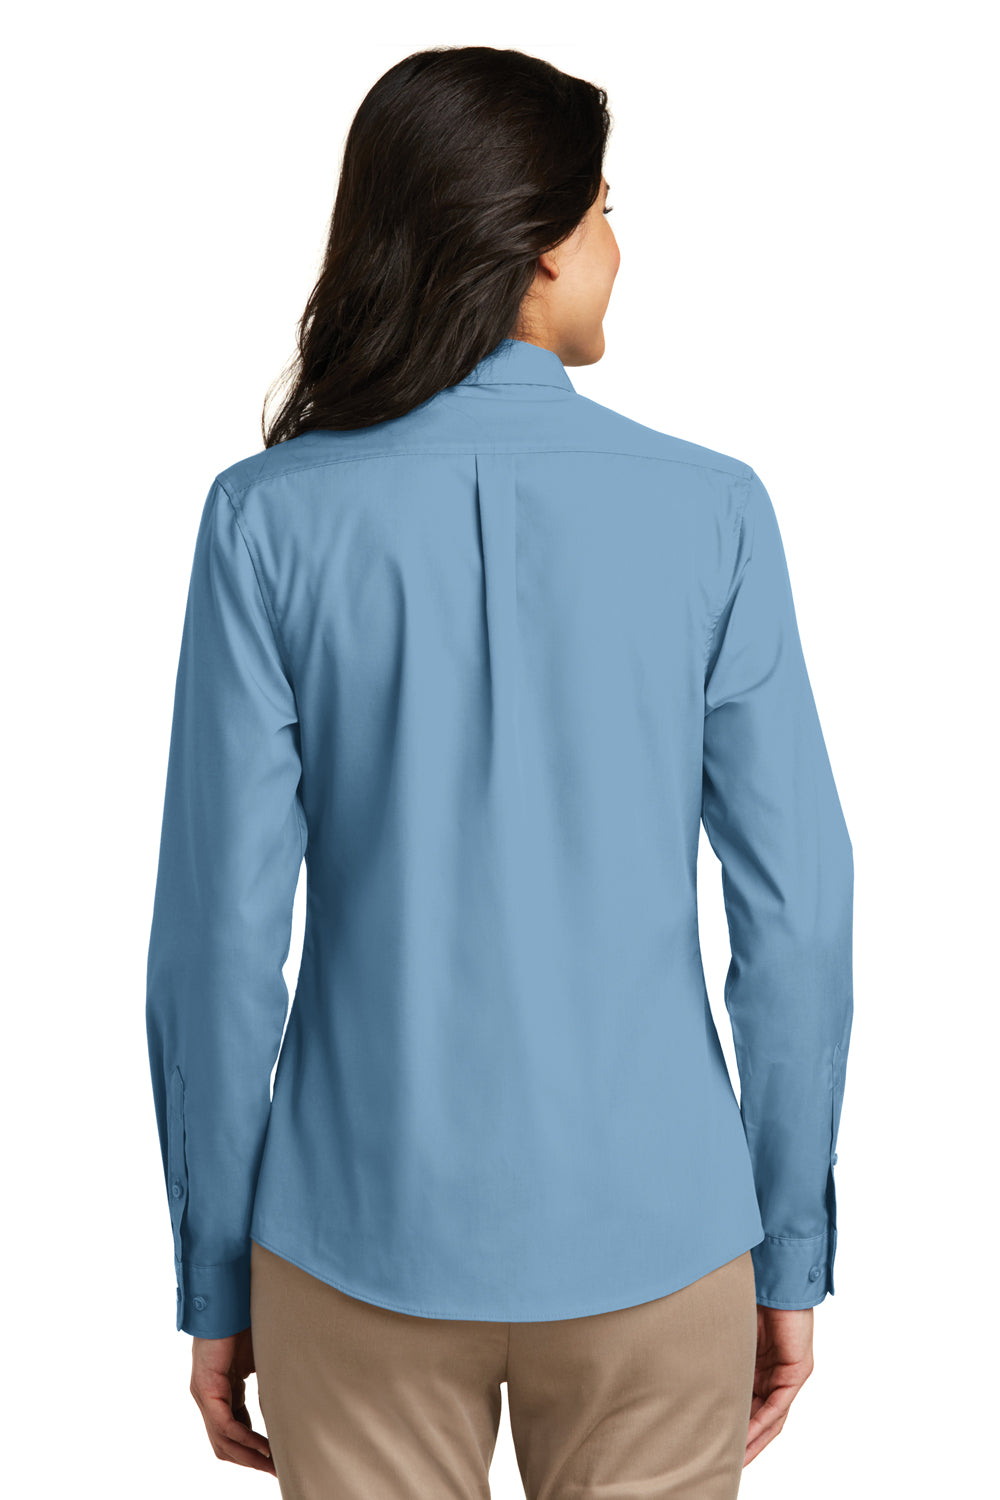 Port Authority LW100 Womens Carefree Stain Resistant Long Sleeve Button Down Shirt Carolina Blue Back